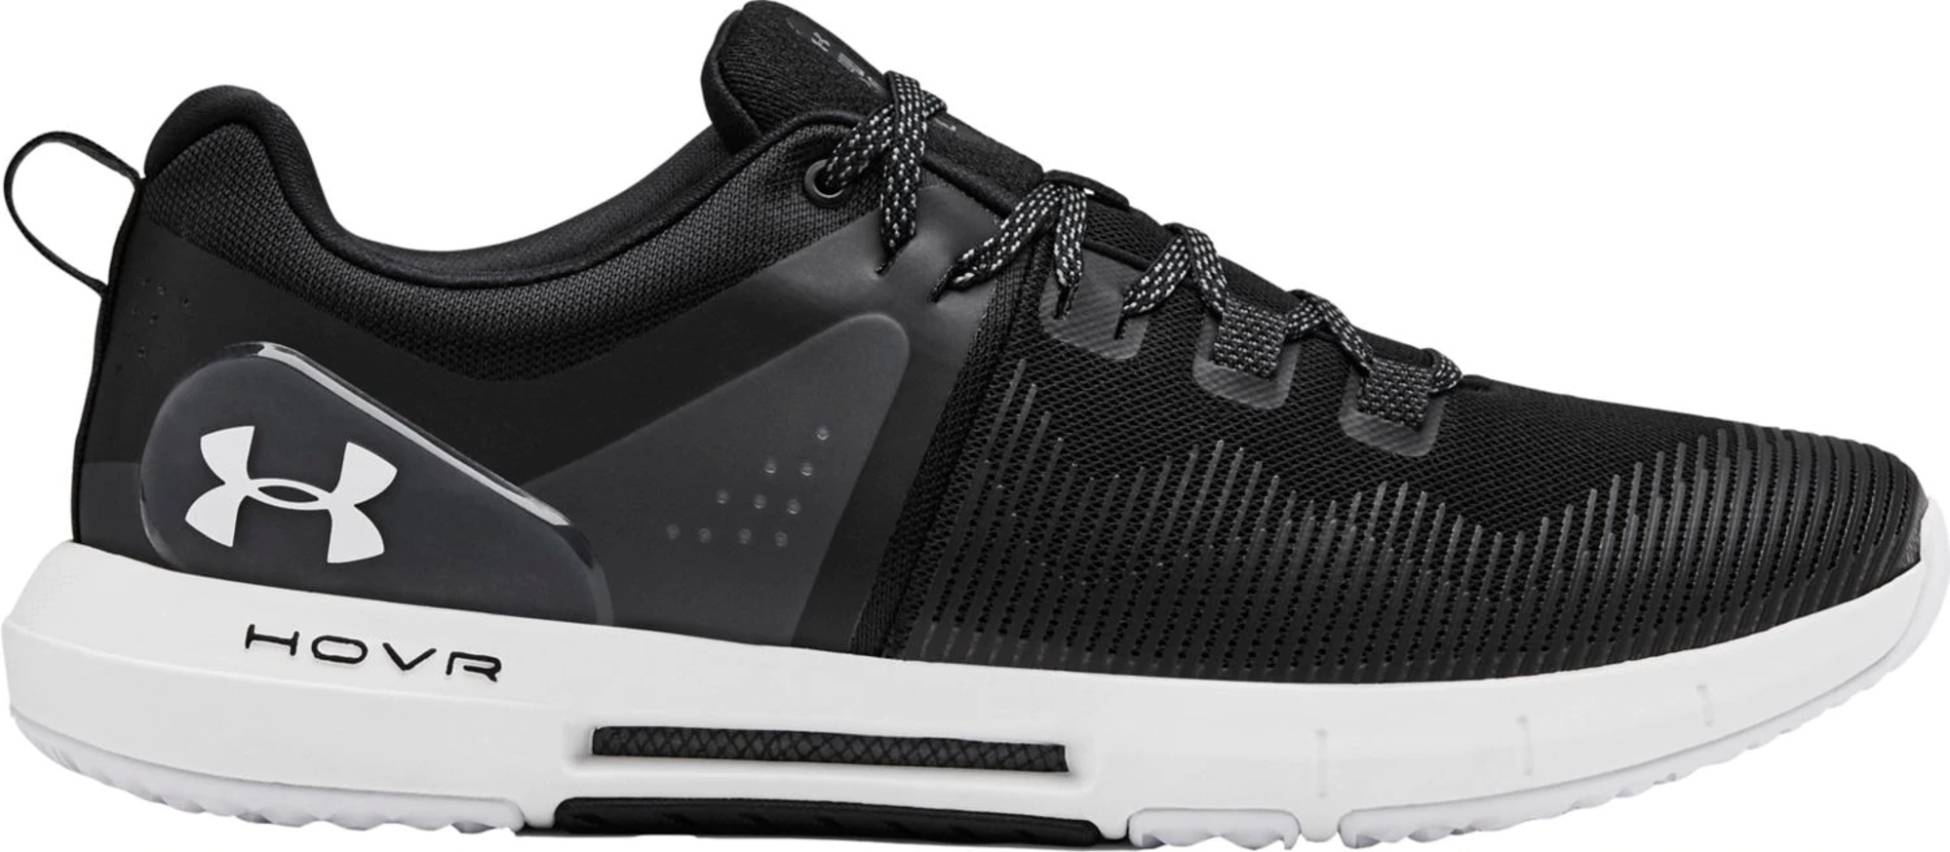 Under Armour Mens HOVR Rise 2 Cross Trainer